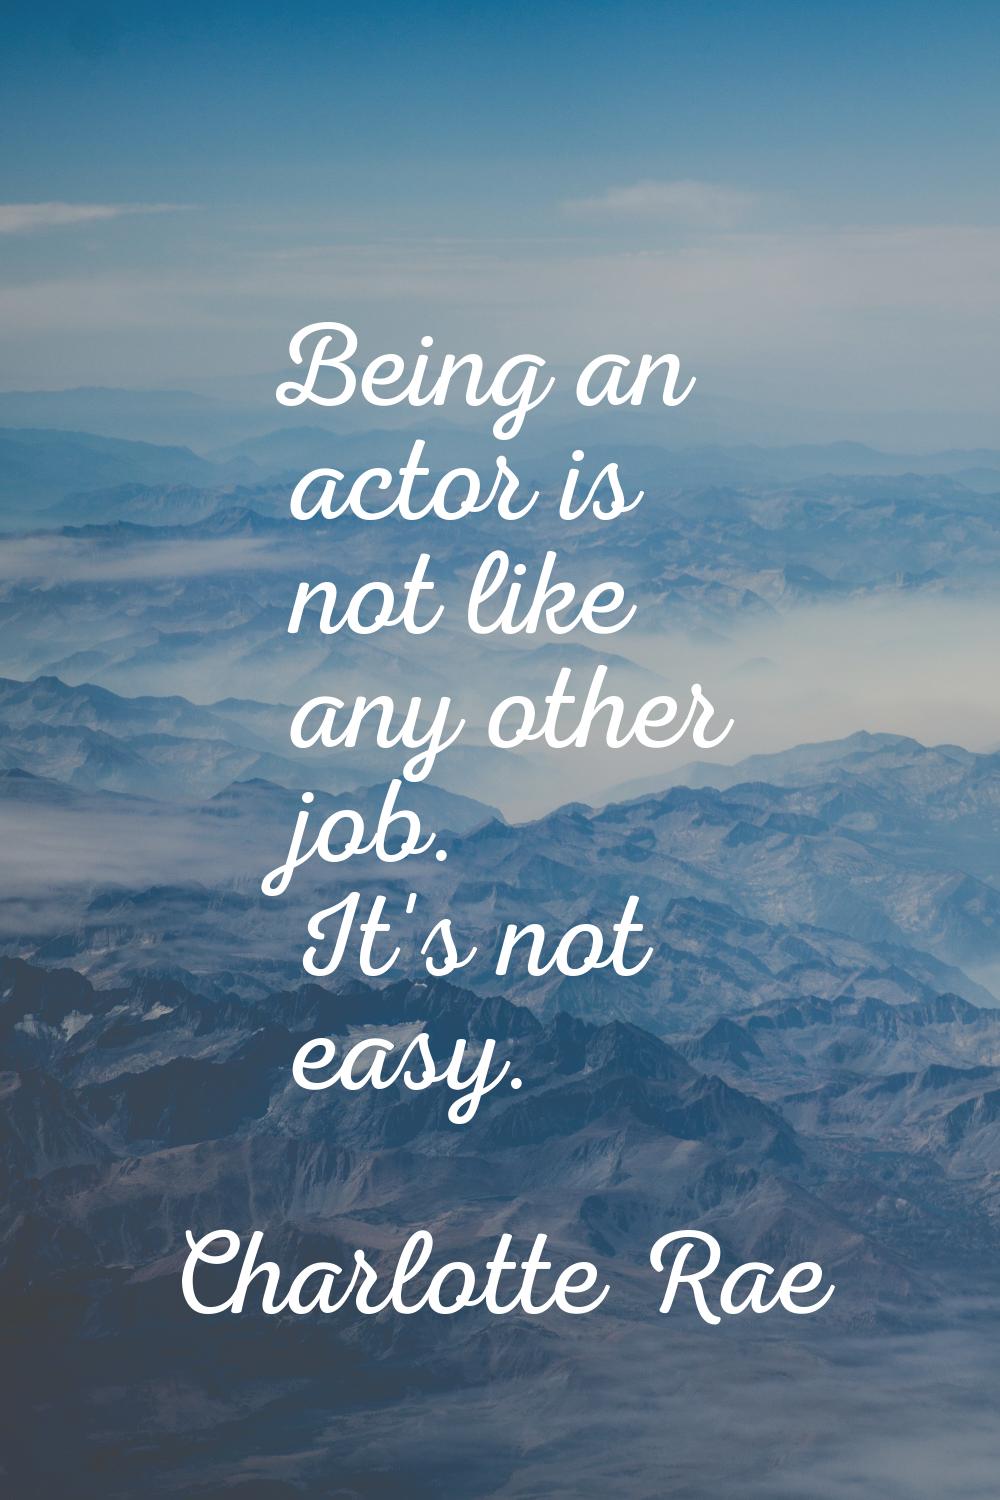 Being an actor is not like any other job. It's not easy.